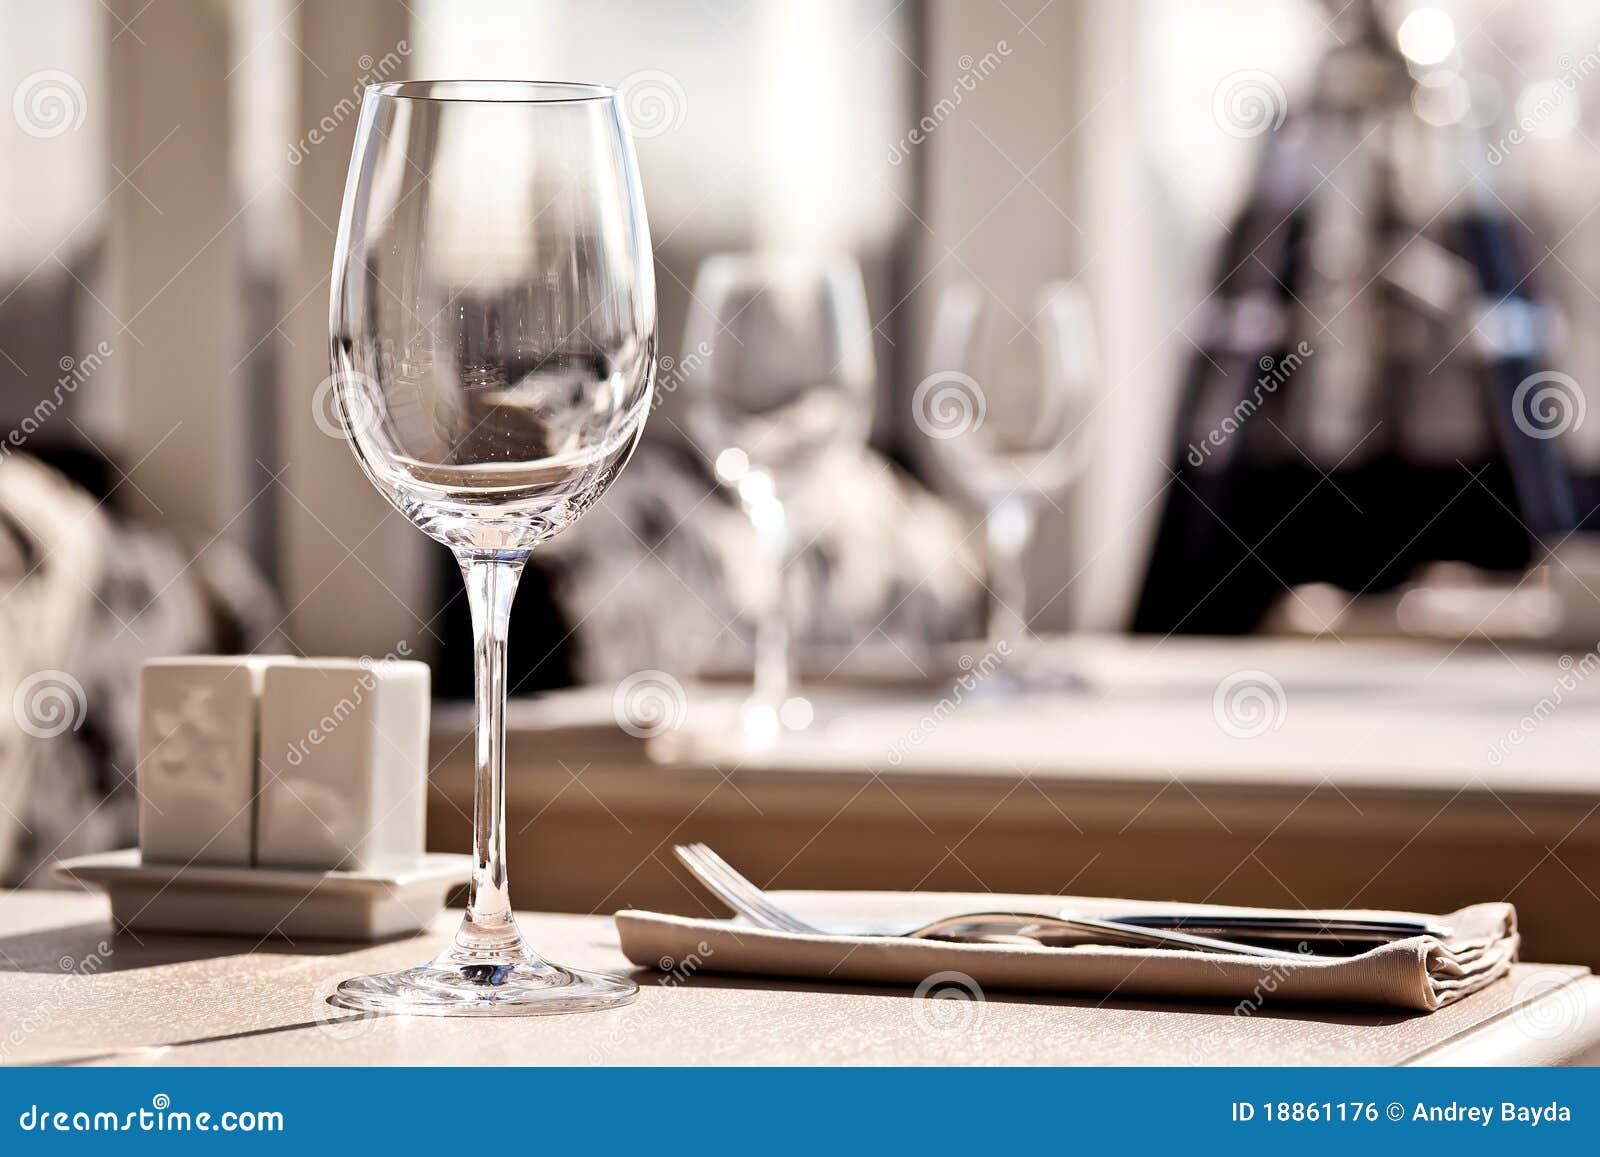 Fine Restaurant Dinner Table Place Setting Royalty Free Stock Image